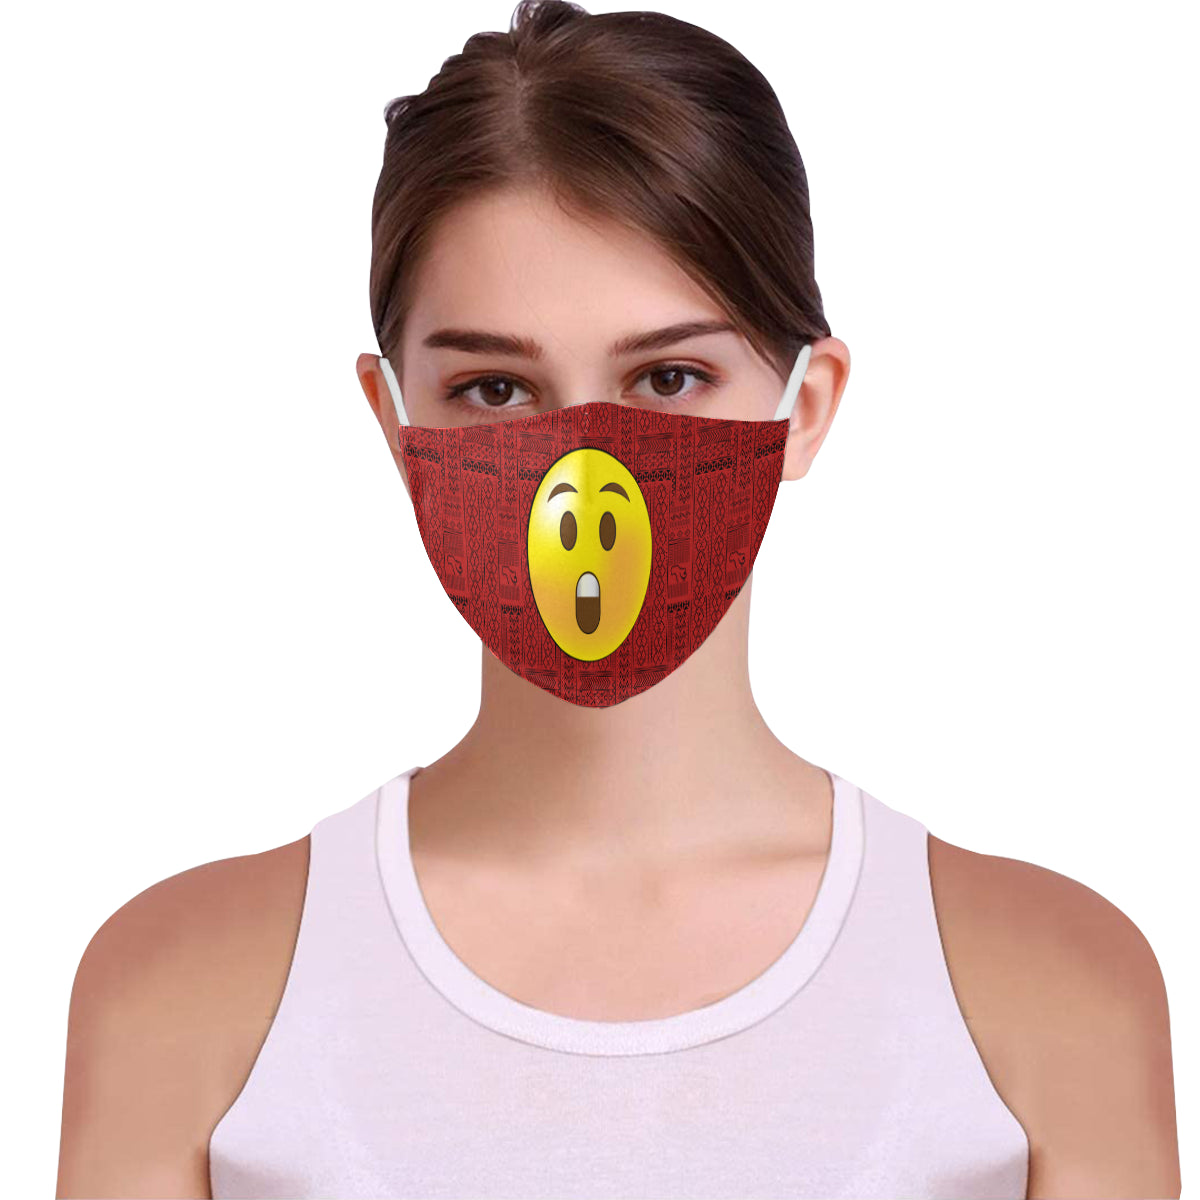 Whaaaaatttt??? Tribal Print Emoji Cotton Fabric Face Mask with Filter Slot and Adjustable Strap - Non-medical use (2 Filters Included)